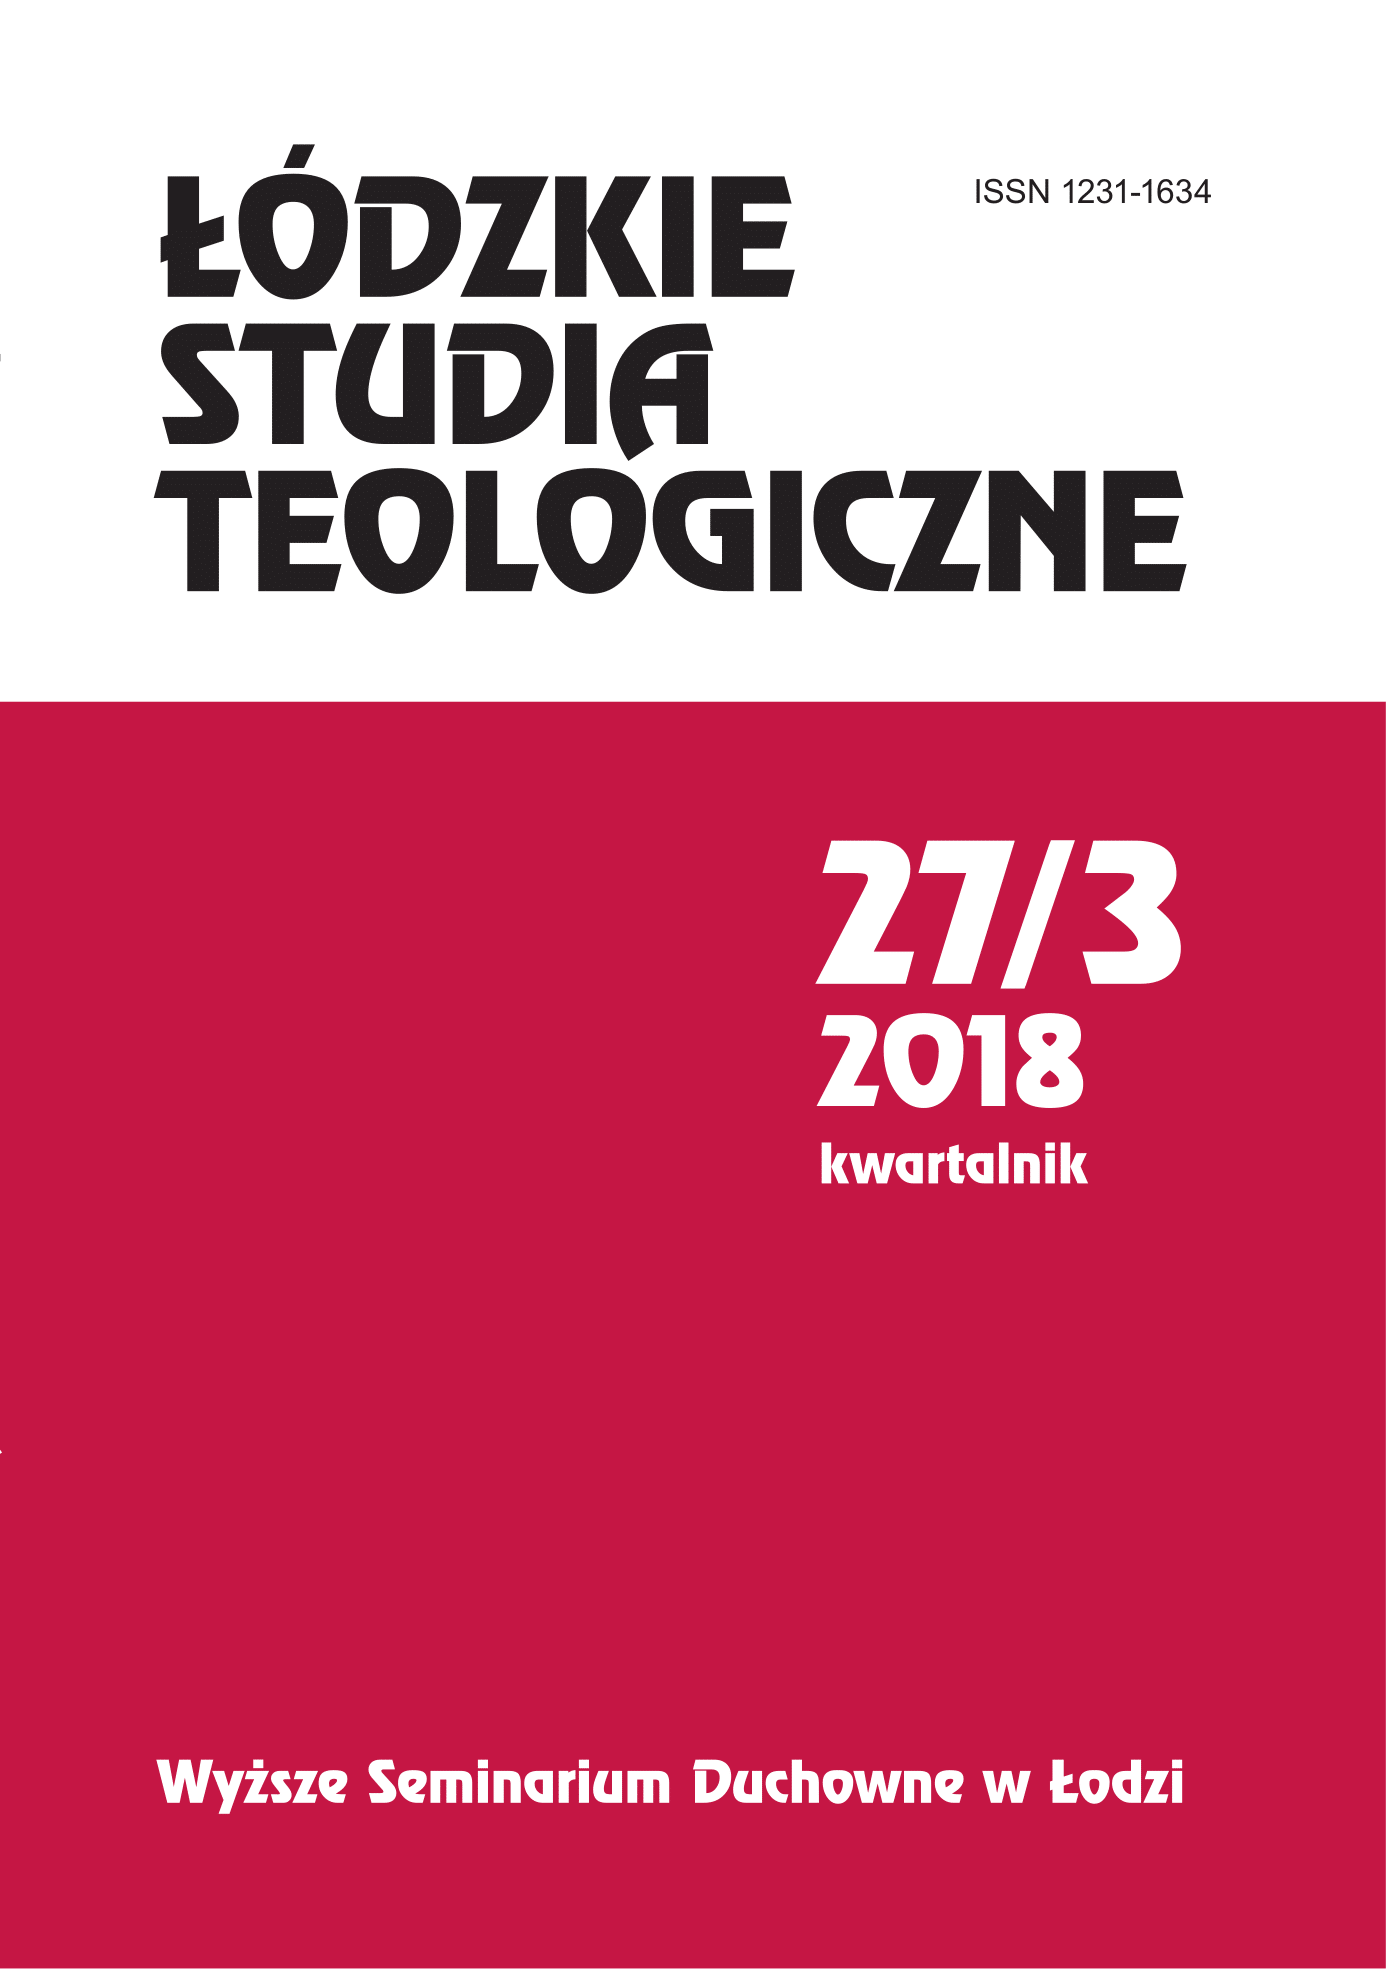 Polish Diaspora issues in post-Soviet countries in resources and projects of the University of Rzeszów Research Centre on Polish Diaspora and Poles in the World Cover Image